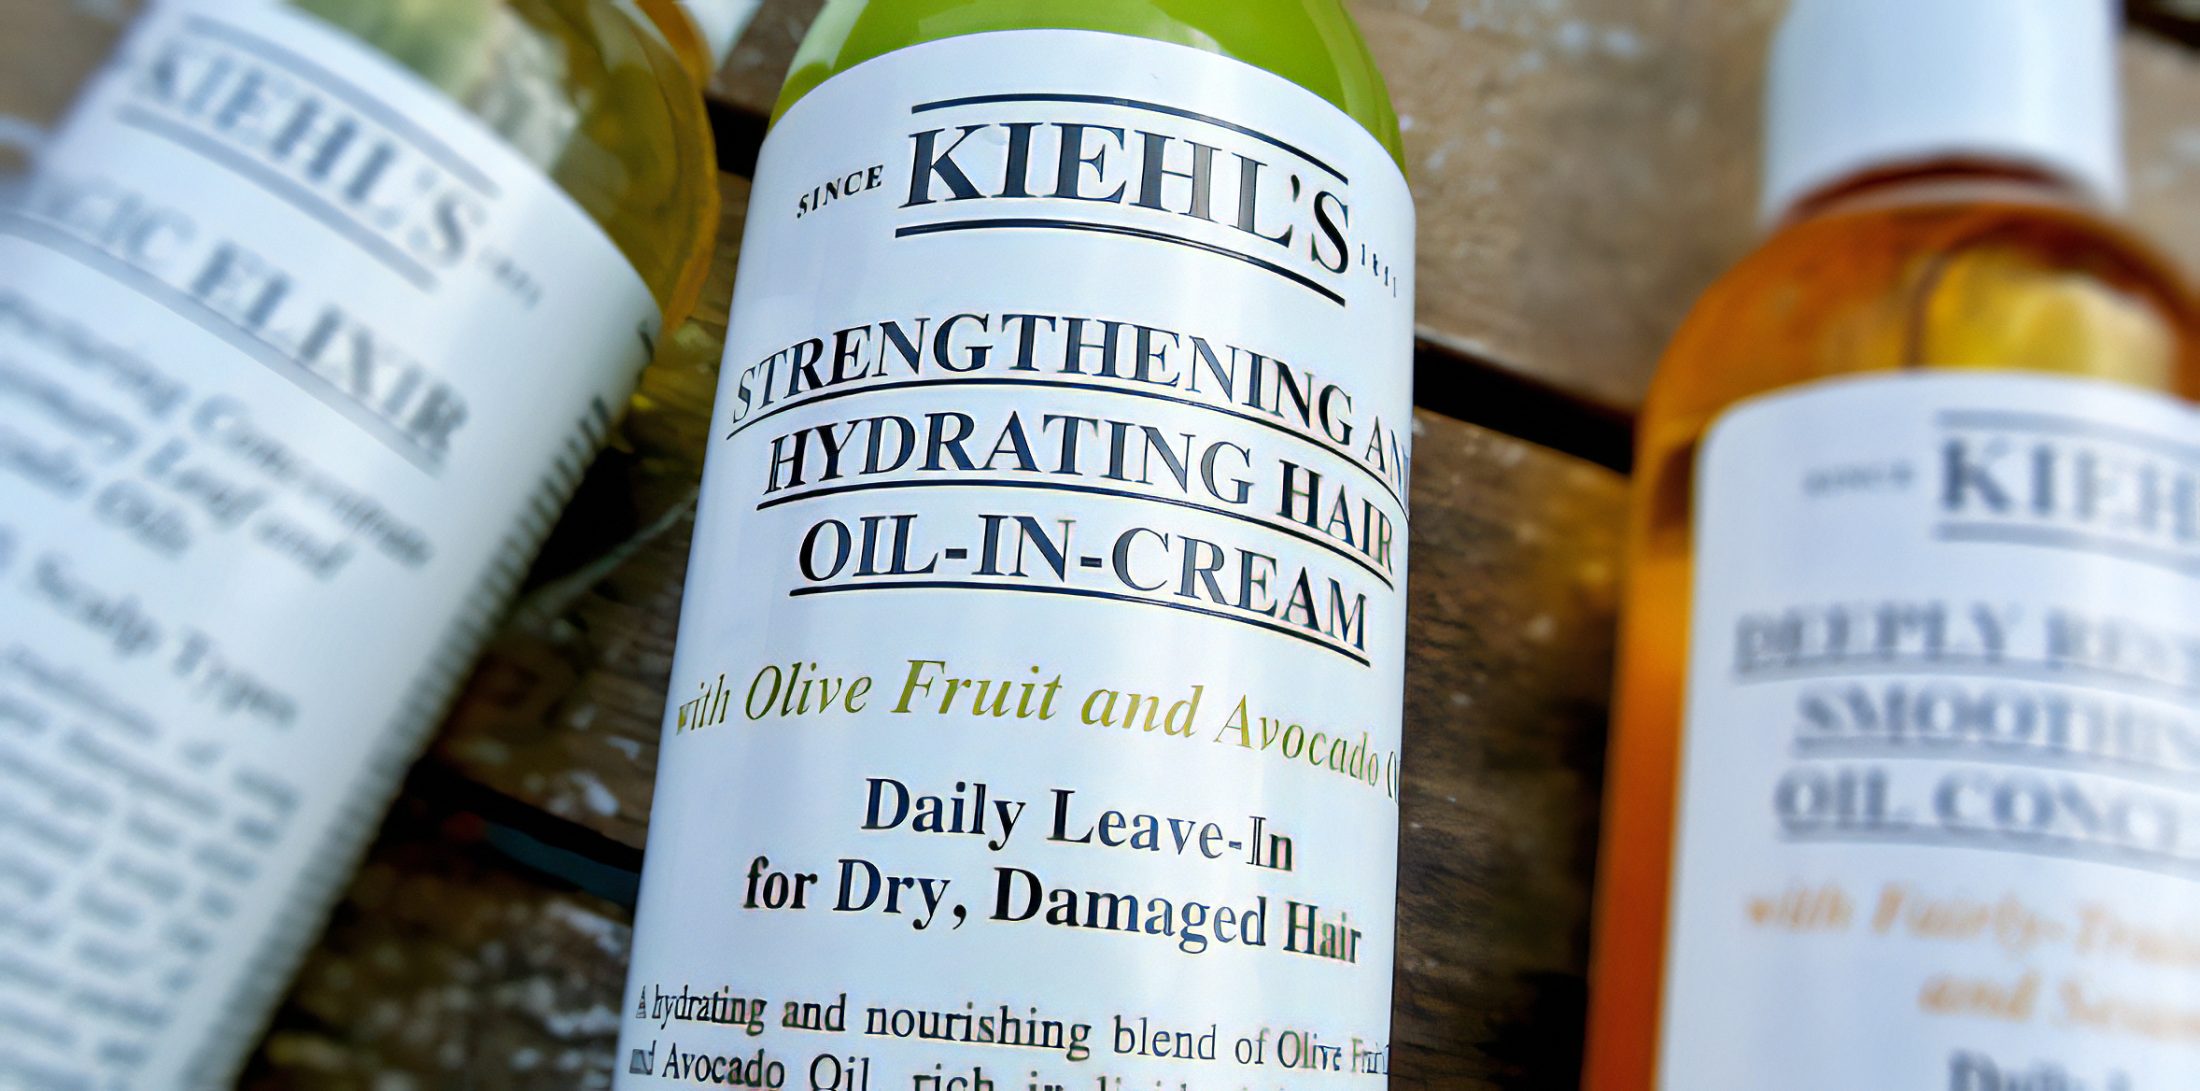 Kiehl’s Magic Elixir / Strengthening and Hydrating Hair Oil-in-Cream / Deeply Restorative Smoothing Hair Oil Concentrate